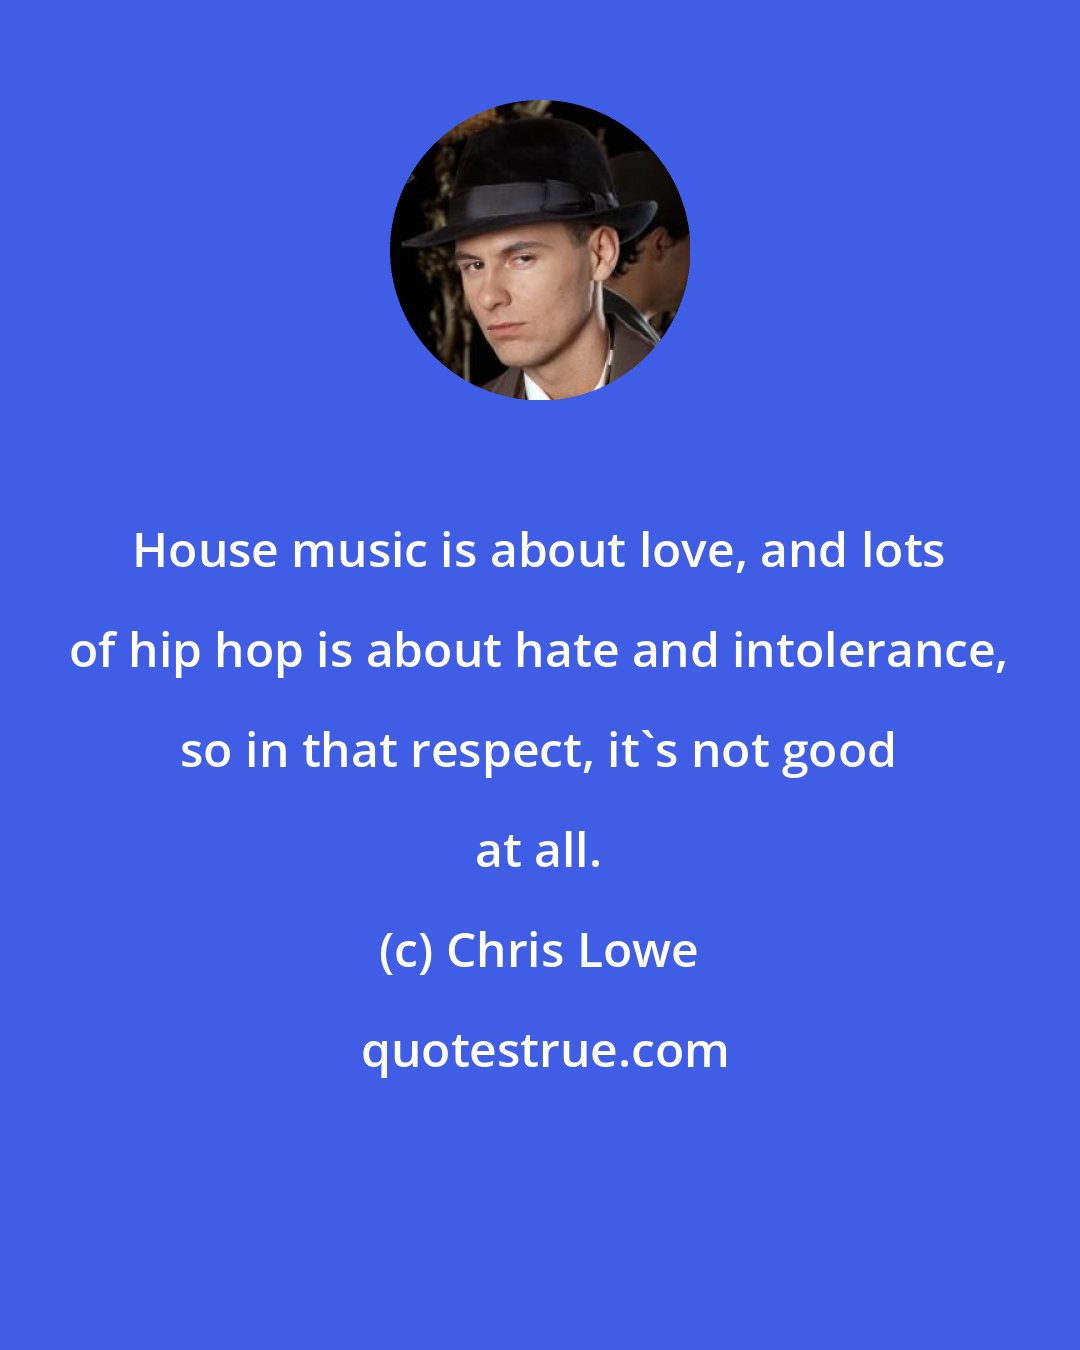 Chris Lowe: House music is about love, and lots of hip hop is about hate and intolerance, so in that respect, it's not good at all.